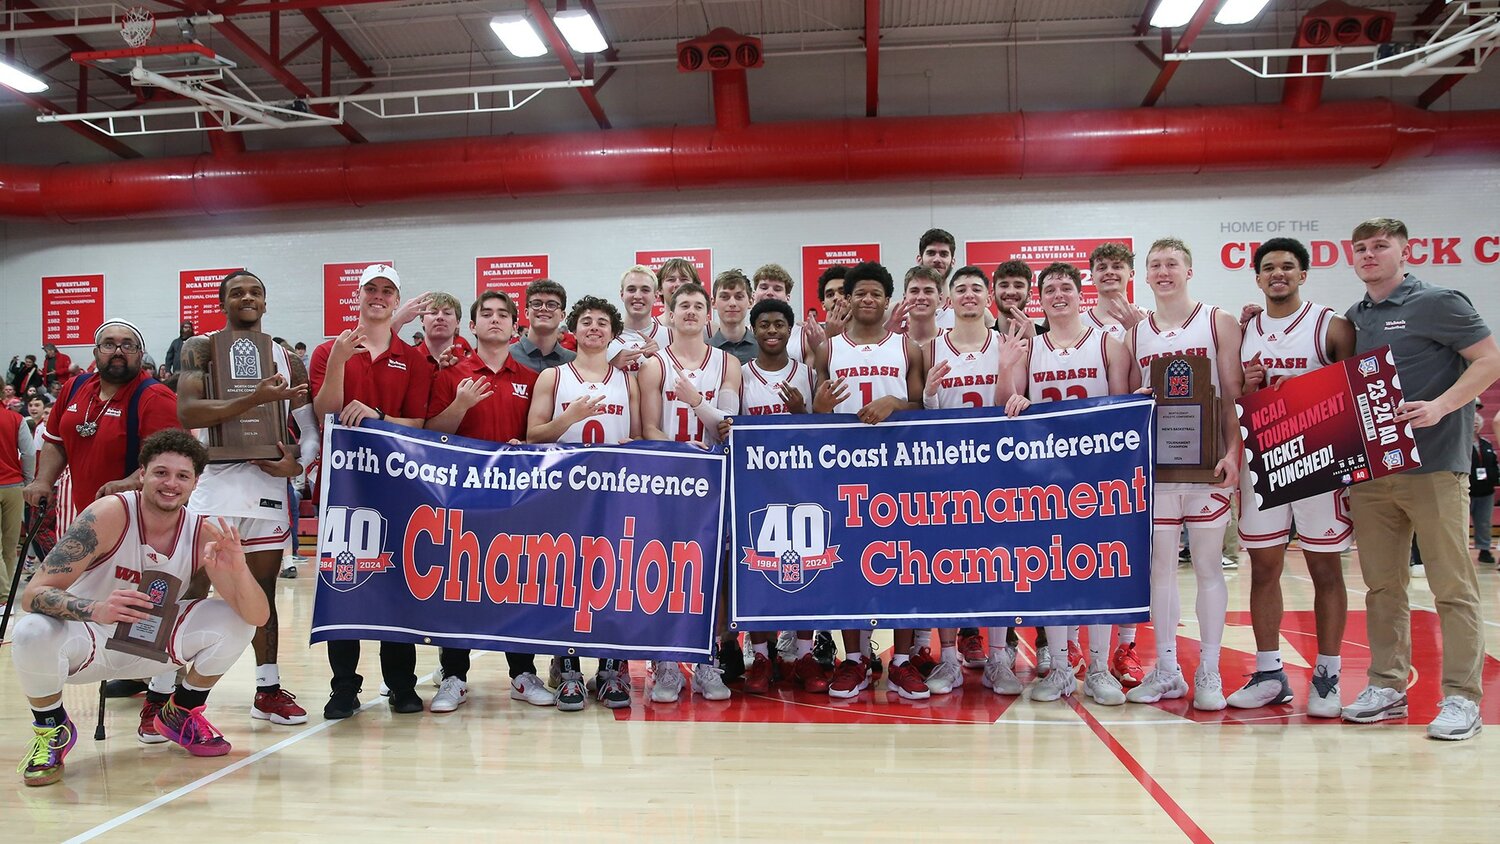 For the 3rd straight season Wabash College Men’s Basketball were champions of the North Coast Athletic Conference and played in the NCAA Division III Men’s Basketball Tournament. It was also their 3rd straight 20-win season as the Little Giants continue their winning ways.